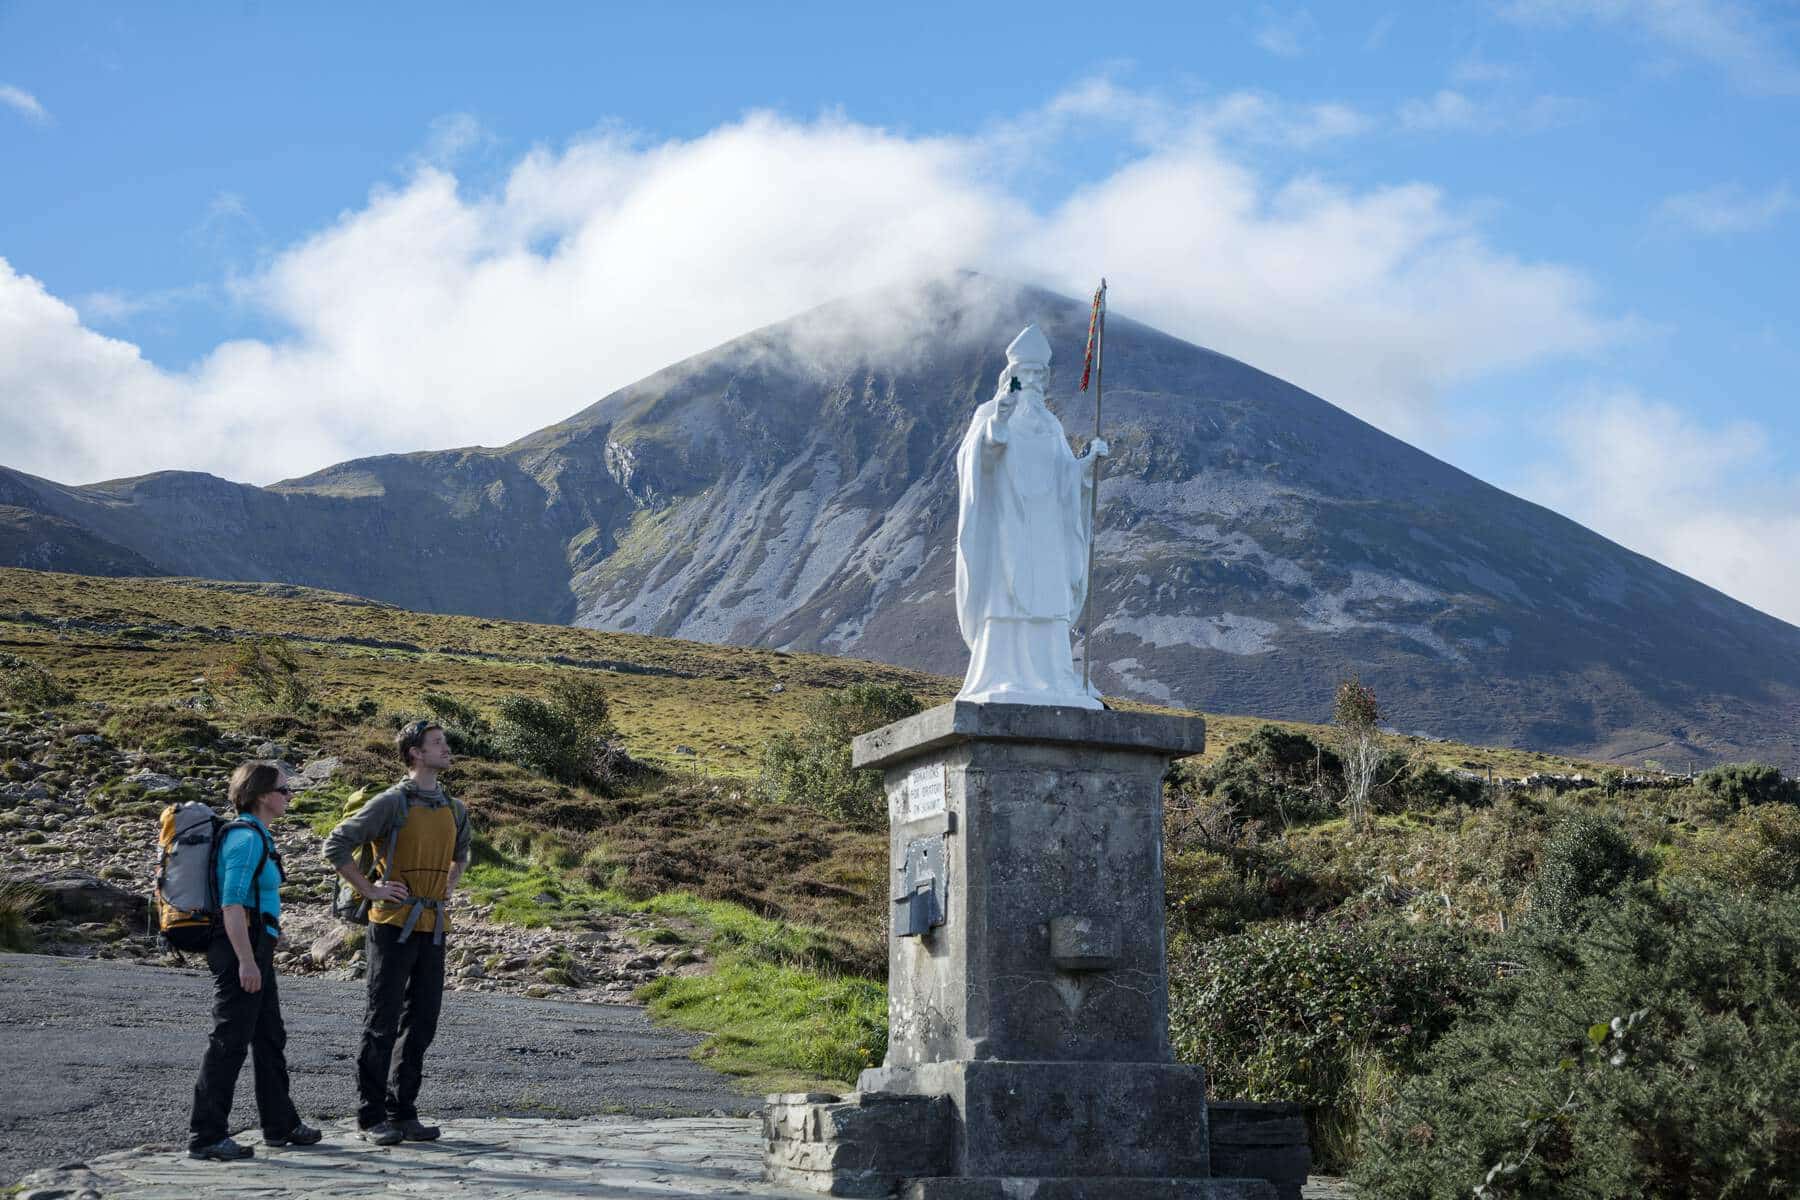 Walkers-pausing-at-statue-of-St-Patrick-at-foot-of-Croagh-Patrick-Co-Mayo_Web-Size-1-1